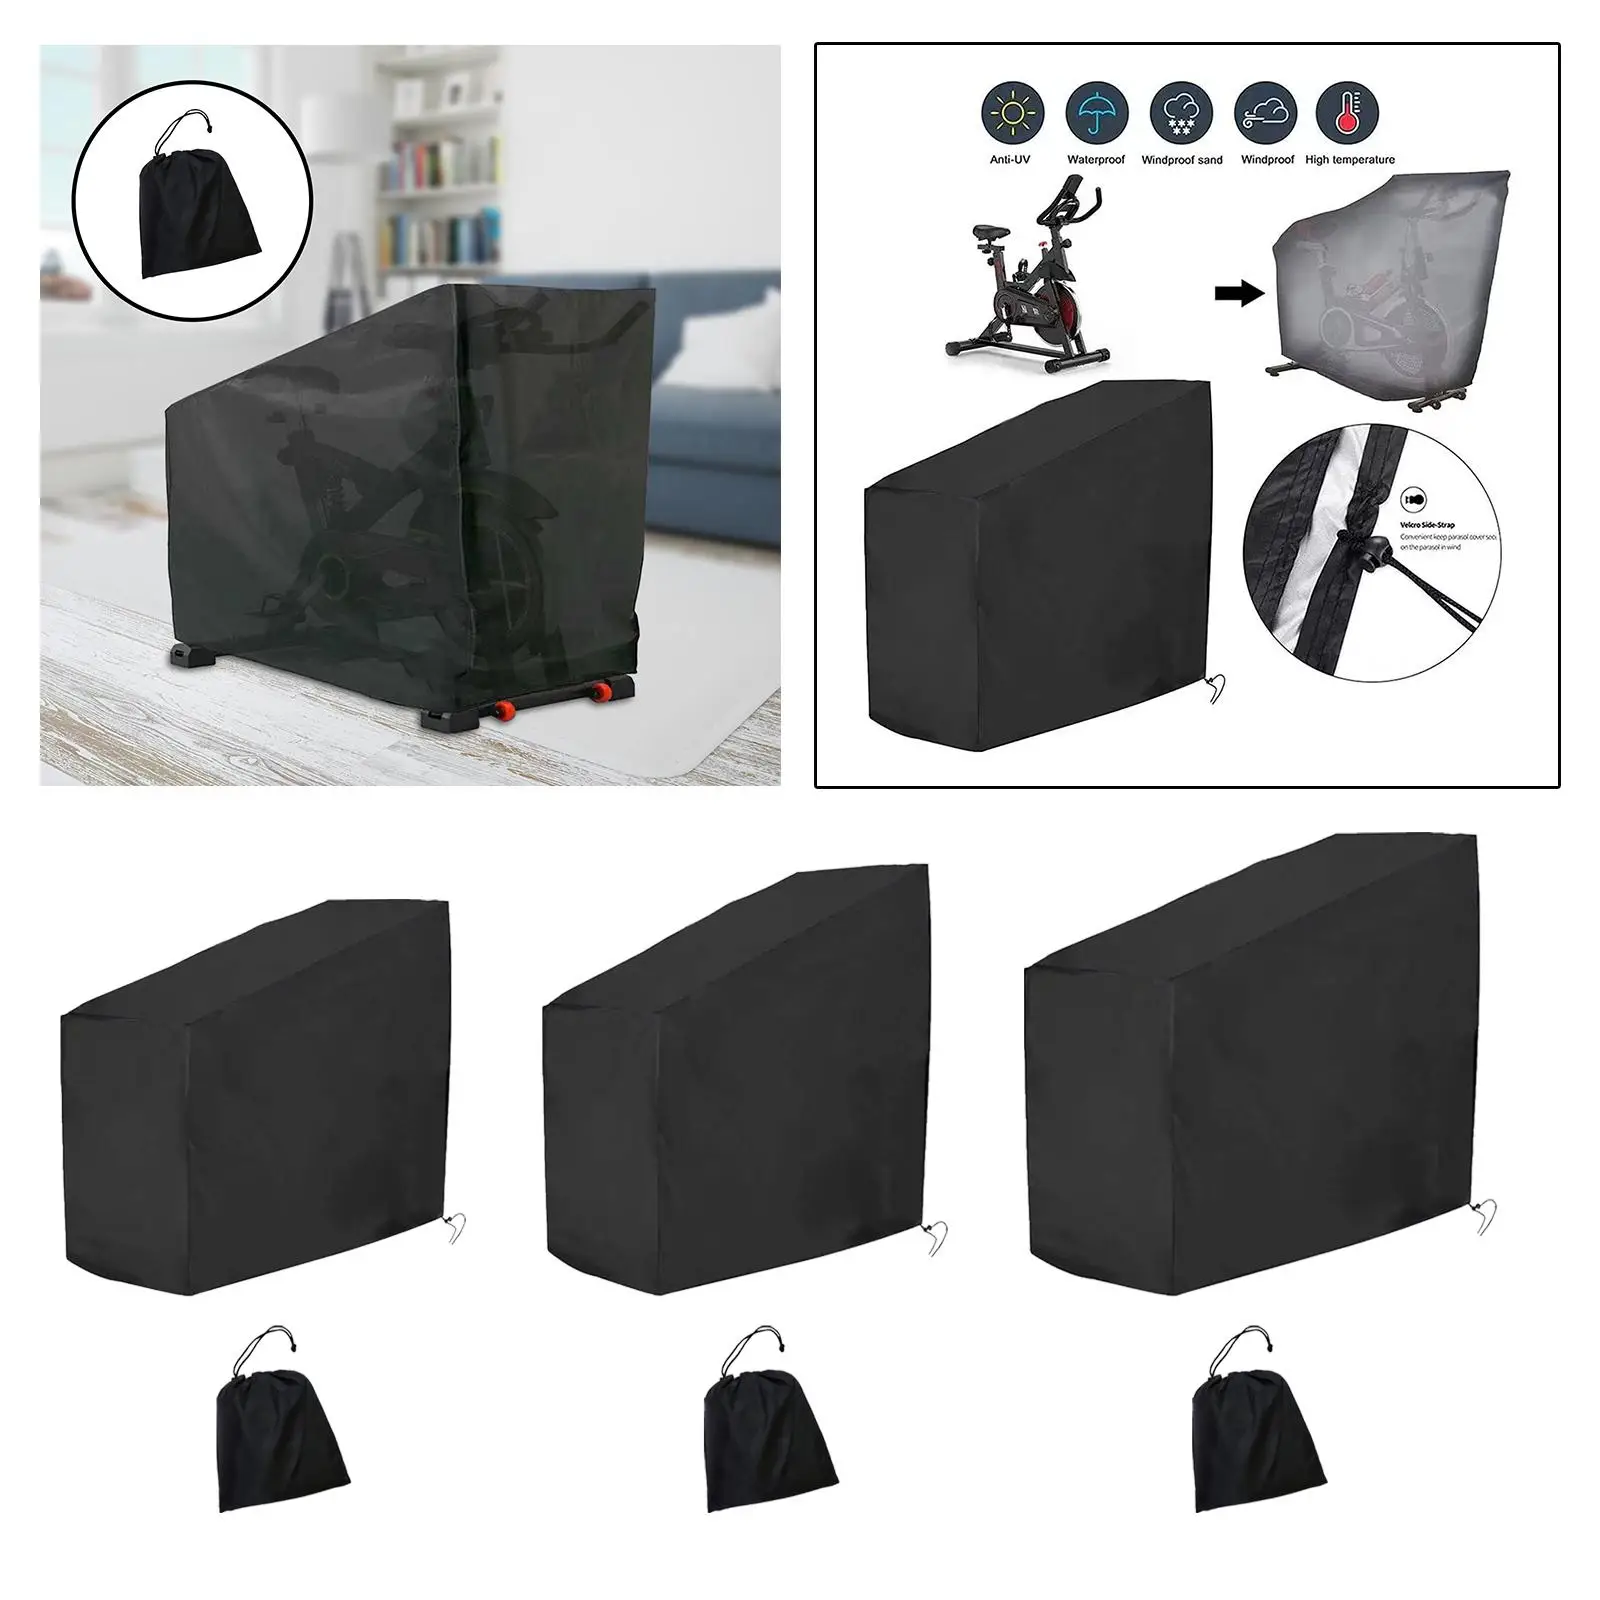 Exercise Bike Cover Rainproof Cycling Bicycle Cover for Garage Winter Indoor